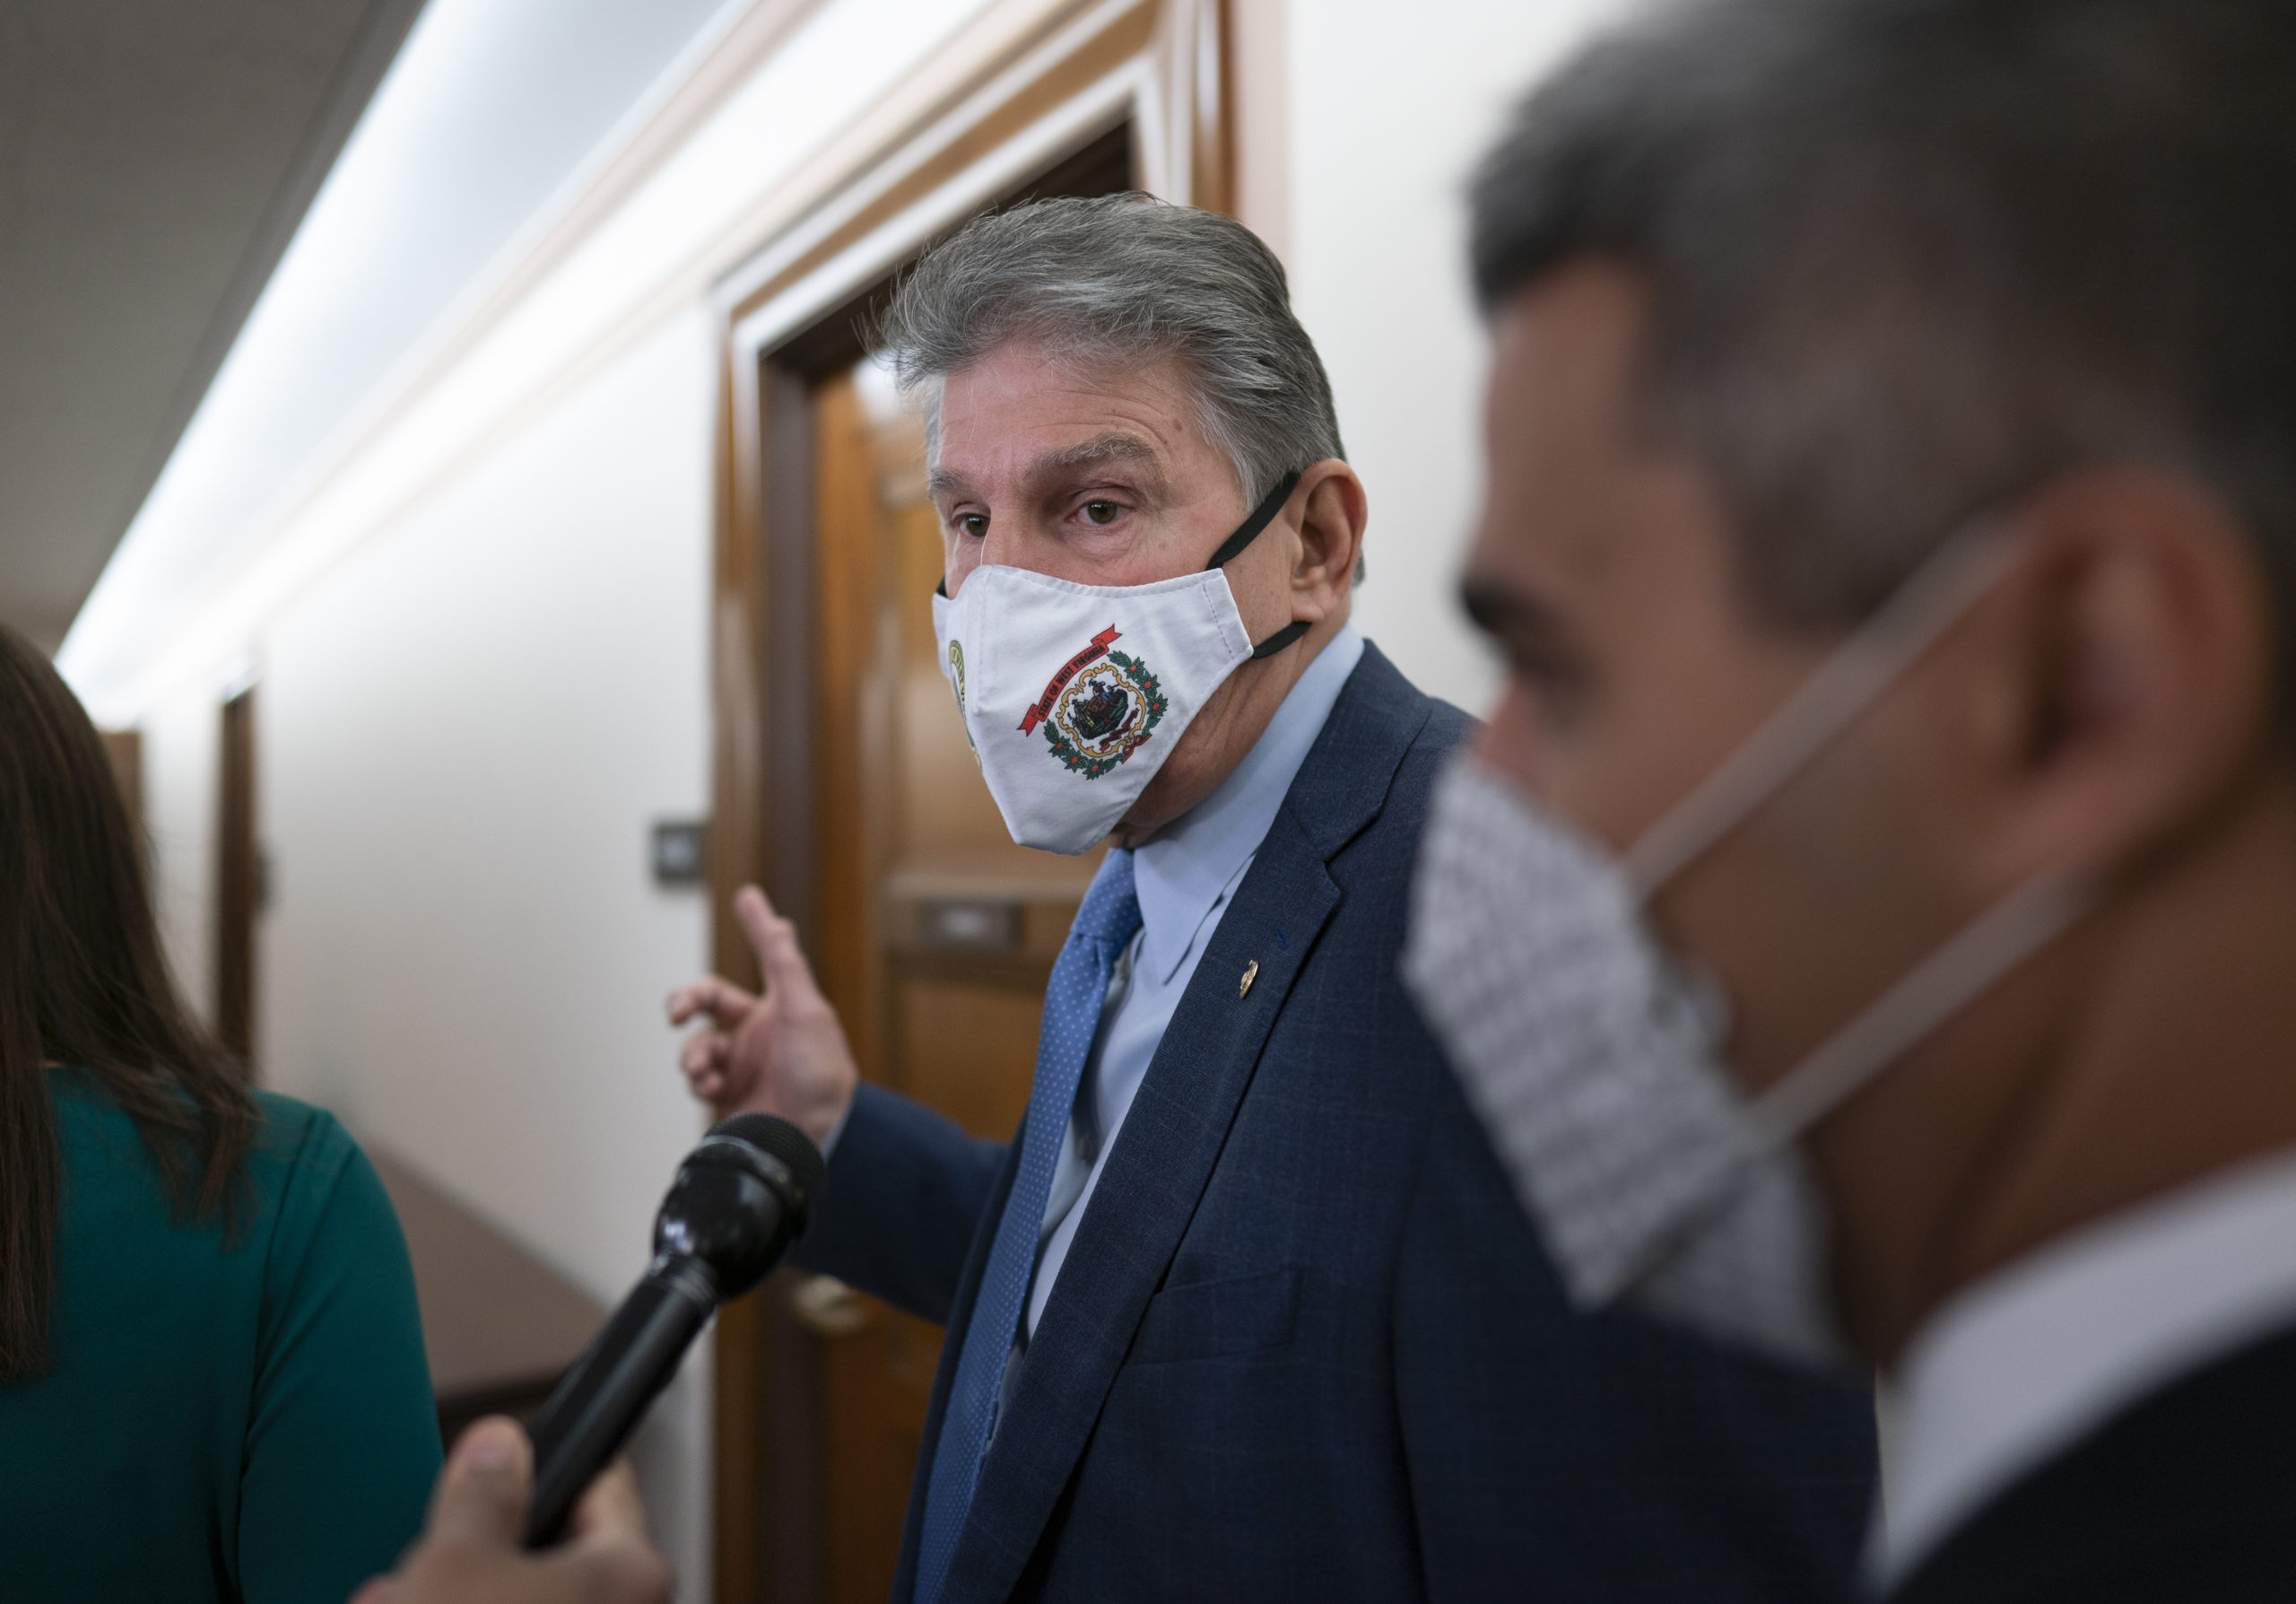 Democratic Sen. Joe Manchin of West Virginia, a key vote on President Joe Biden's domestic spending agenda, tells reporters he's late for a hearing and can't talk at the Capitol on Dec. 2.